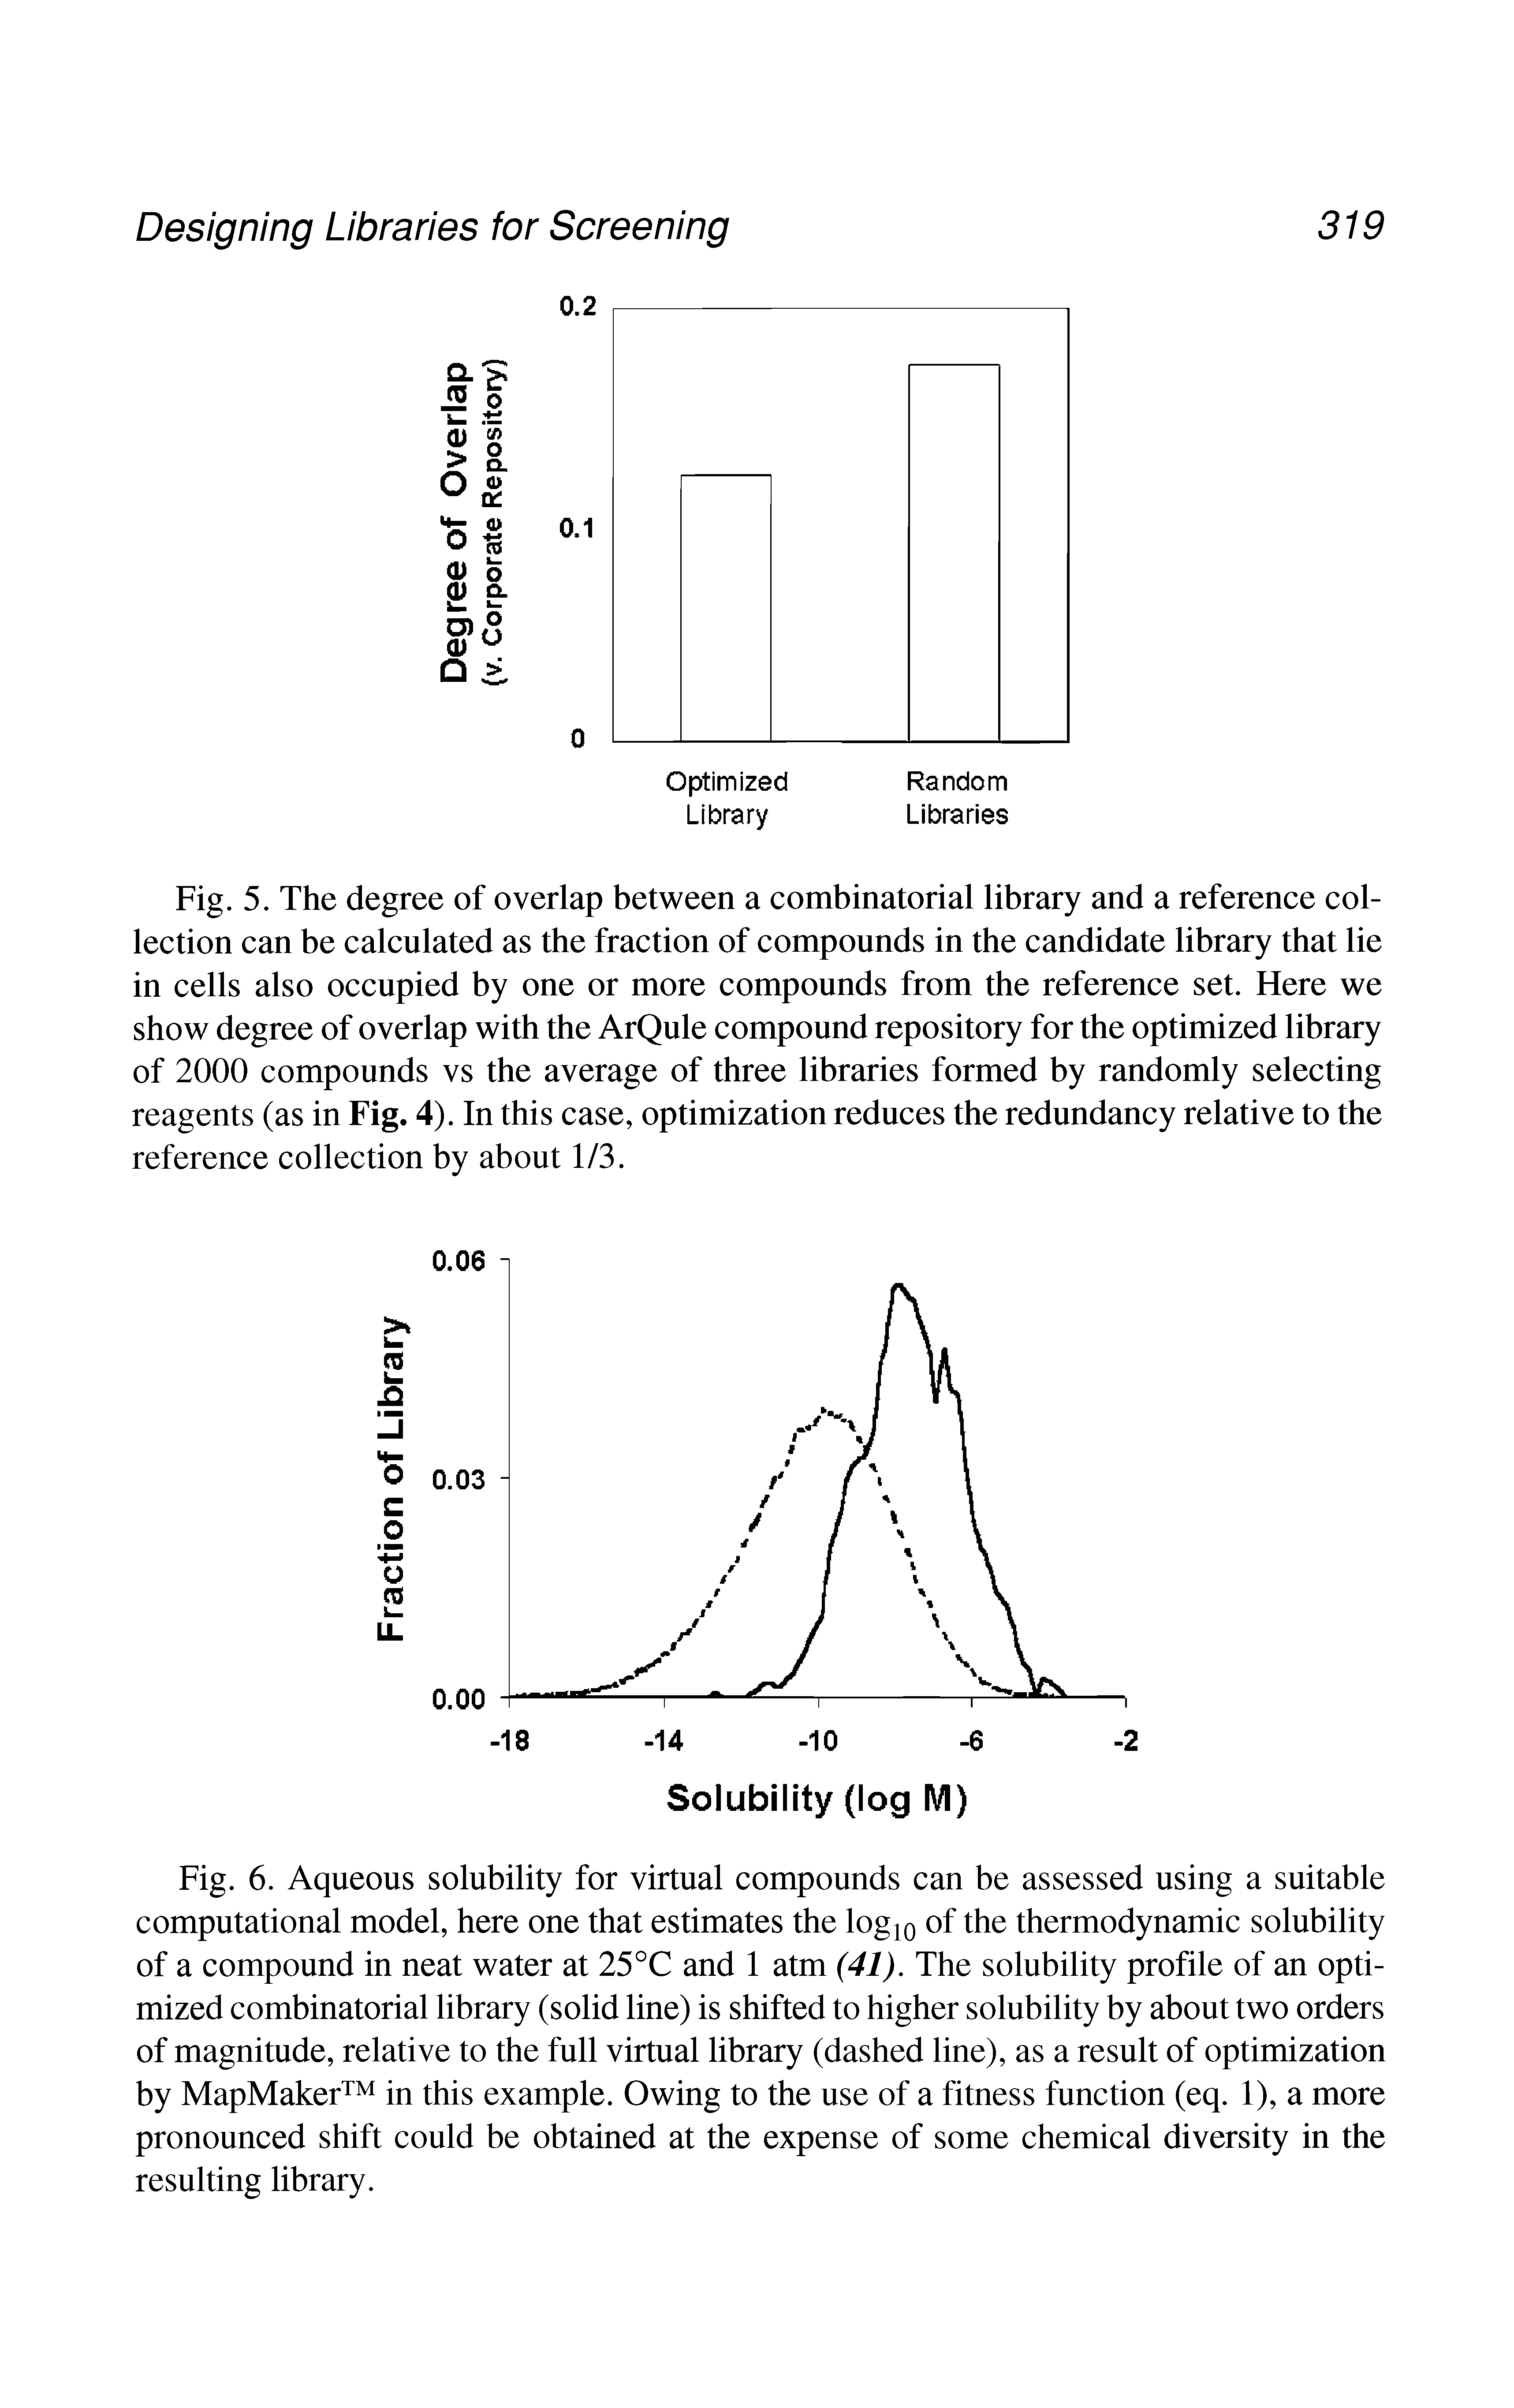 Fig. 5. The degree of overlap between a combinatorial library and a reference collection can be calculated as the fraction of compounds in the candidate library that lie in cells also occupied by one or more compounds from the reference set. Here we show degree of overlap with the ArQule compound repository for the optimized library of 2000 compounds vs the average of three libraries formed by randomly selecting reagents (as in Fig. 4). In this case, optimization reduces the redundancy relative to the reference collection by about 1/3.